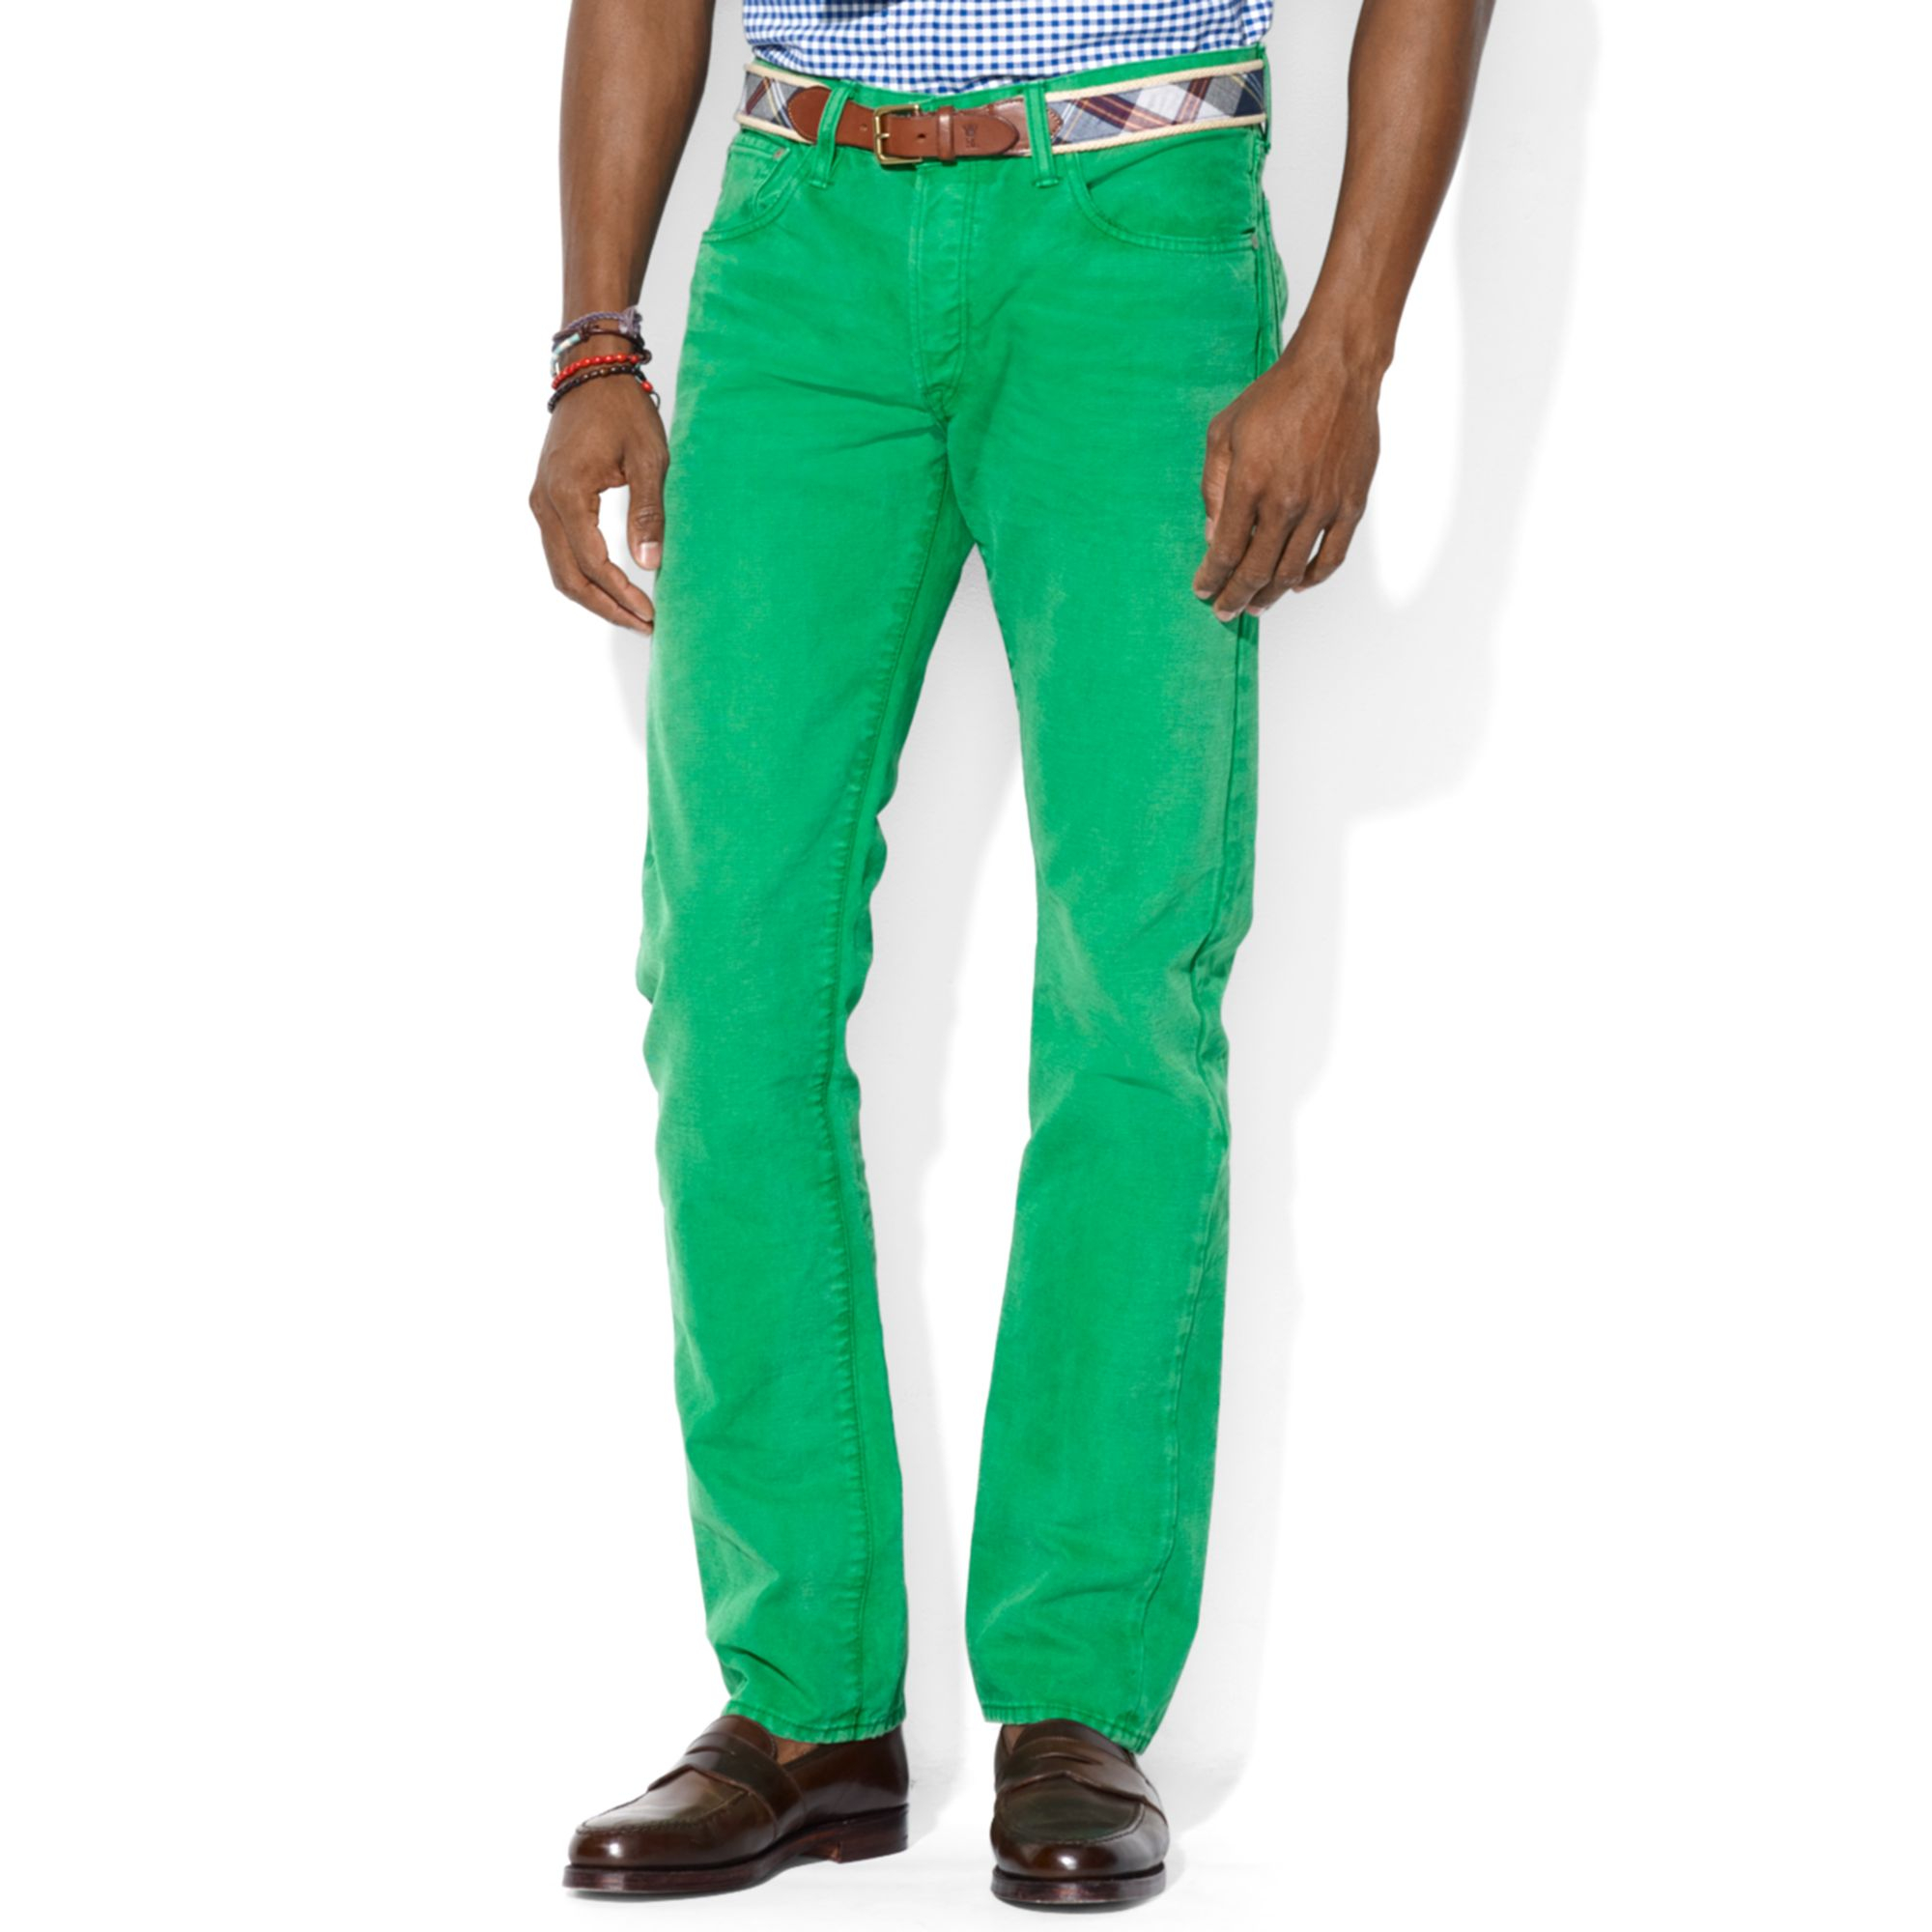 Lyst - Polo Ralph Lauren Polo Varick Slim-fit Canvas Jeans in Green for Men